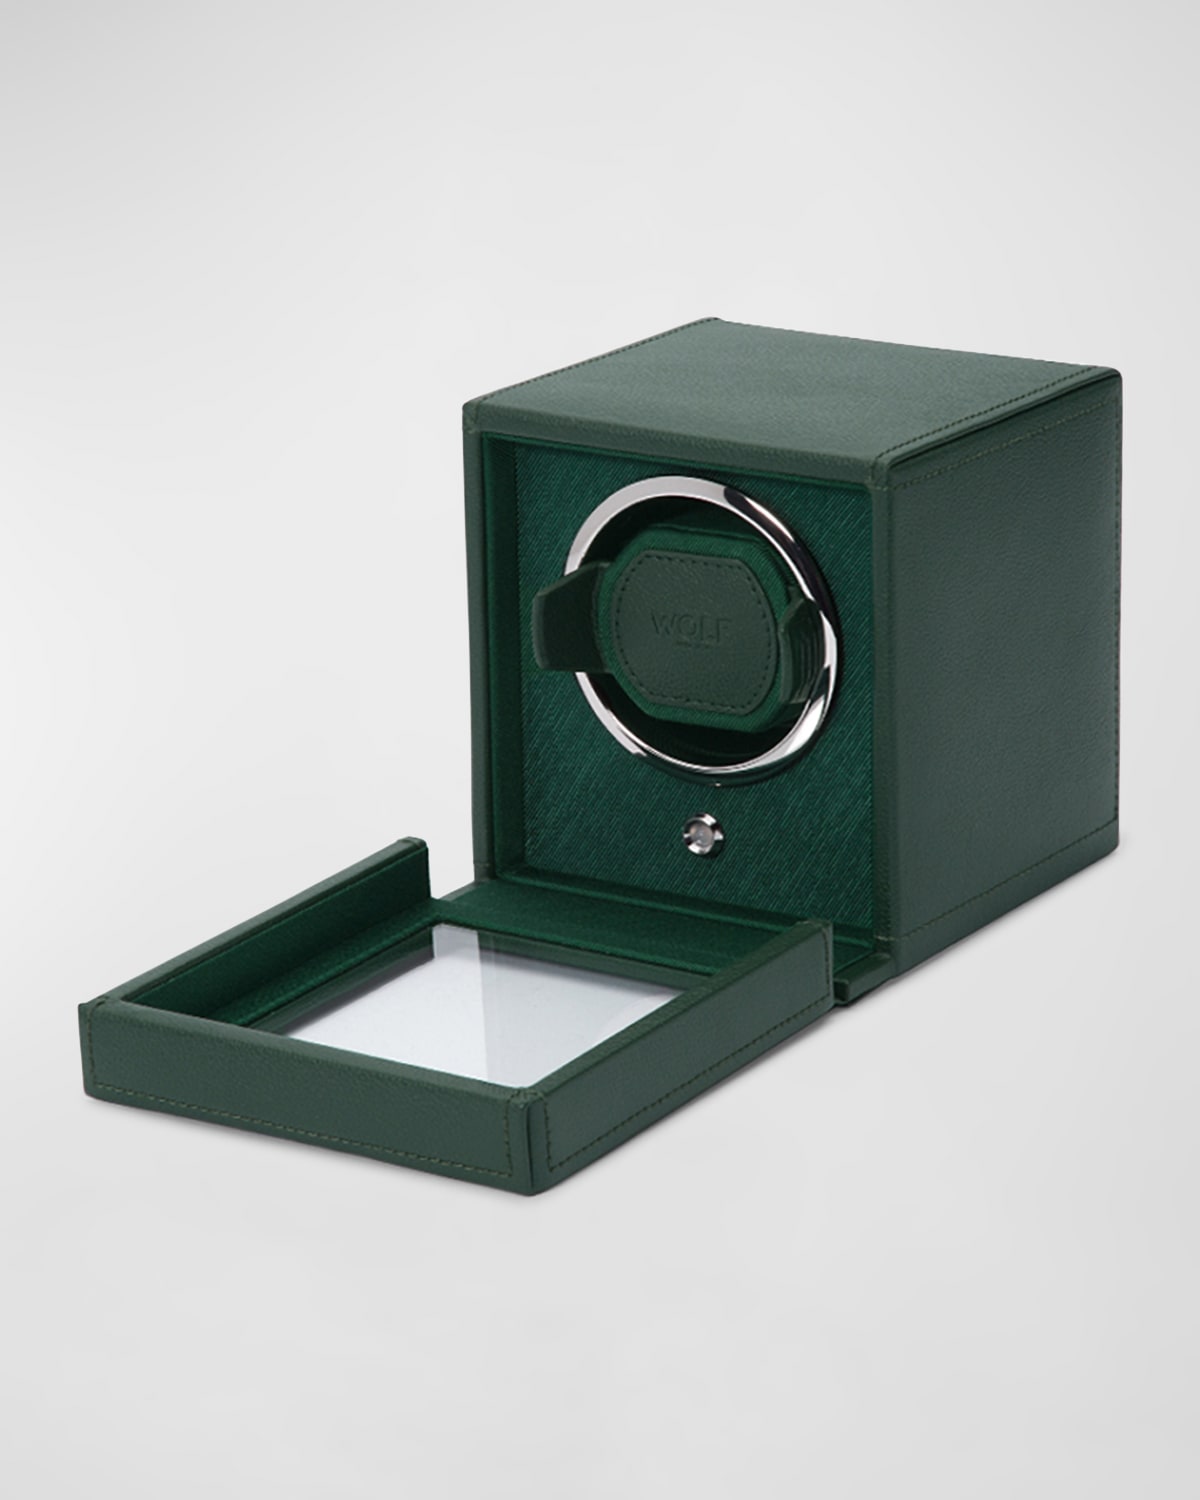 Wolf Cub Single Watch Winder With Cover In Medium Green